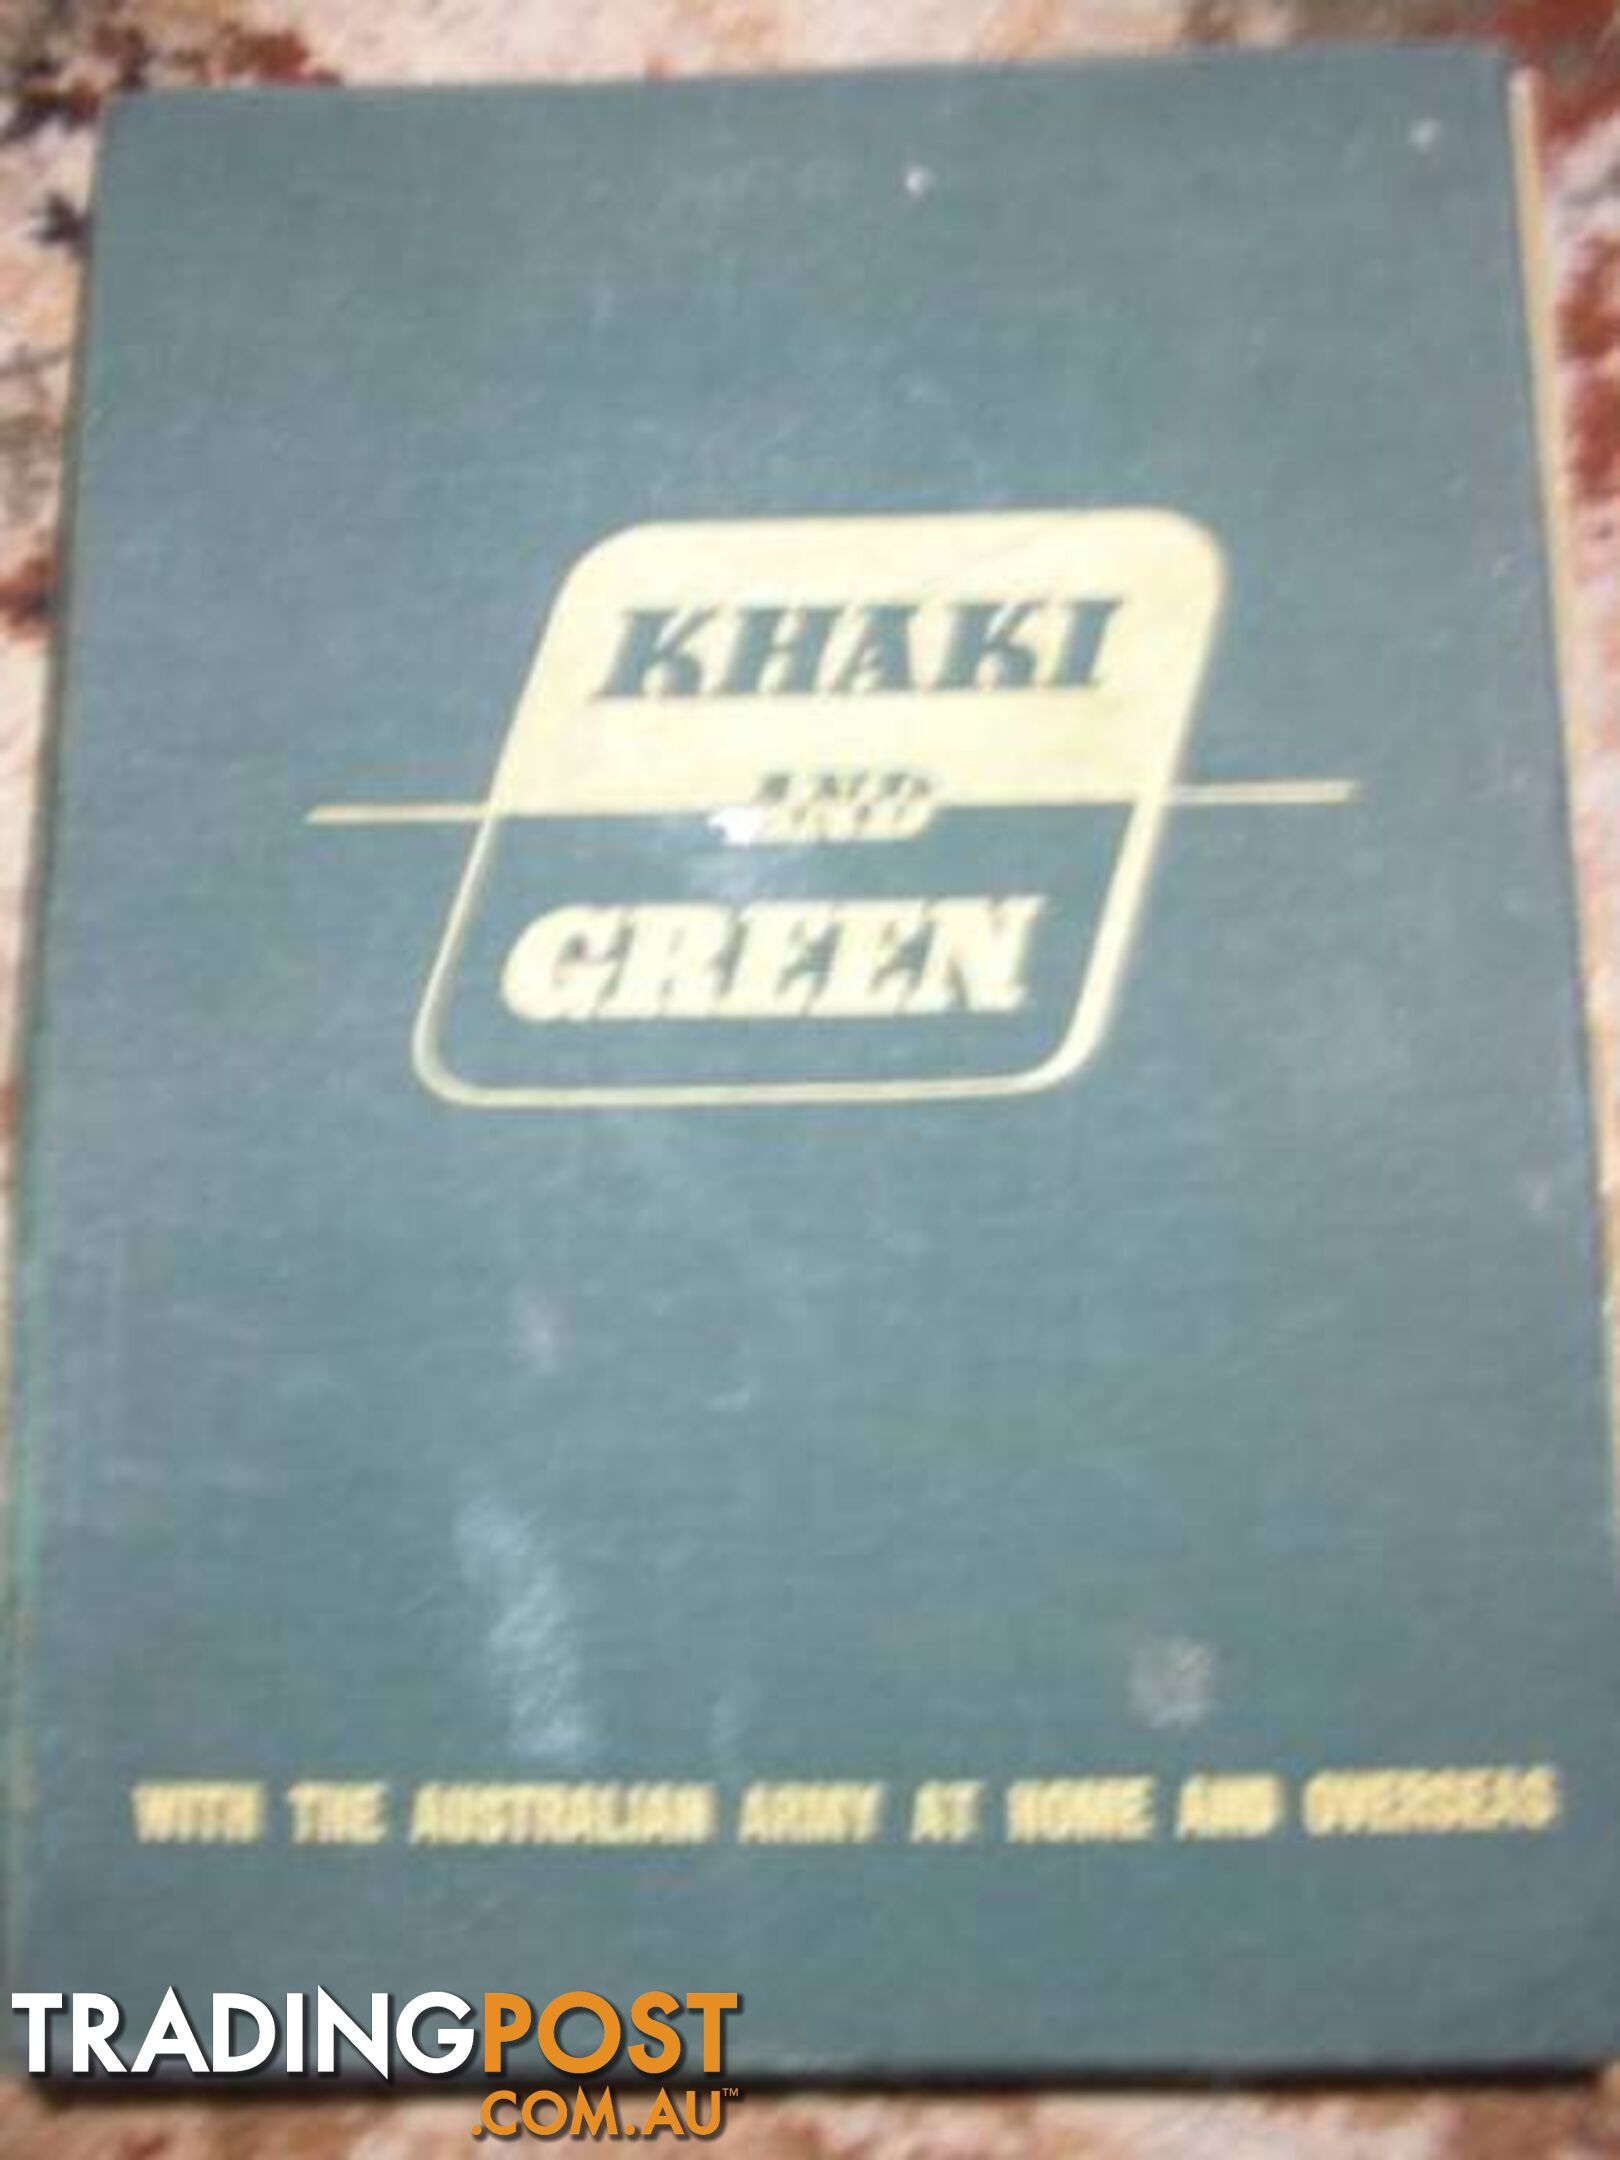 Khaki and Green - With The Australian Army At Home And Overseas